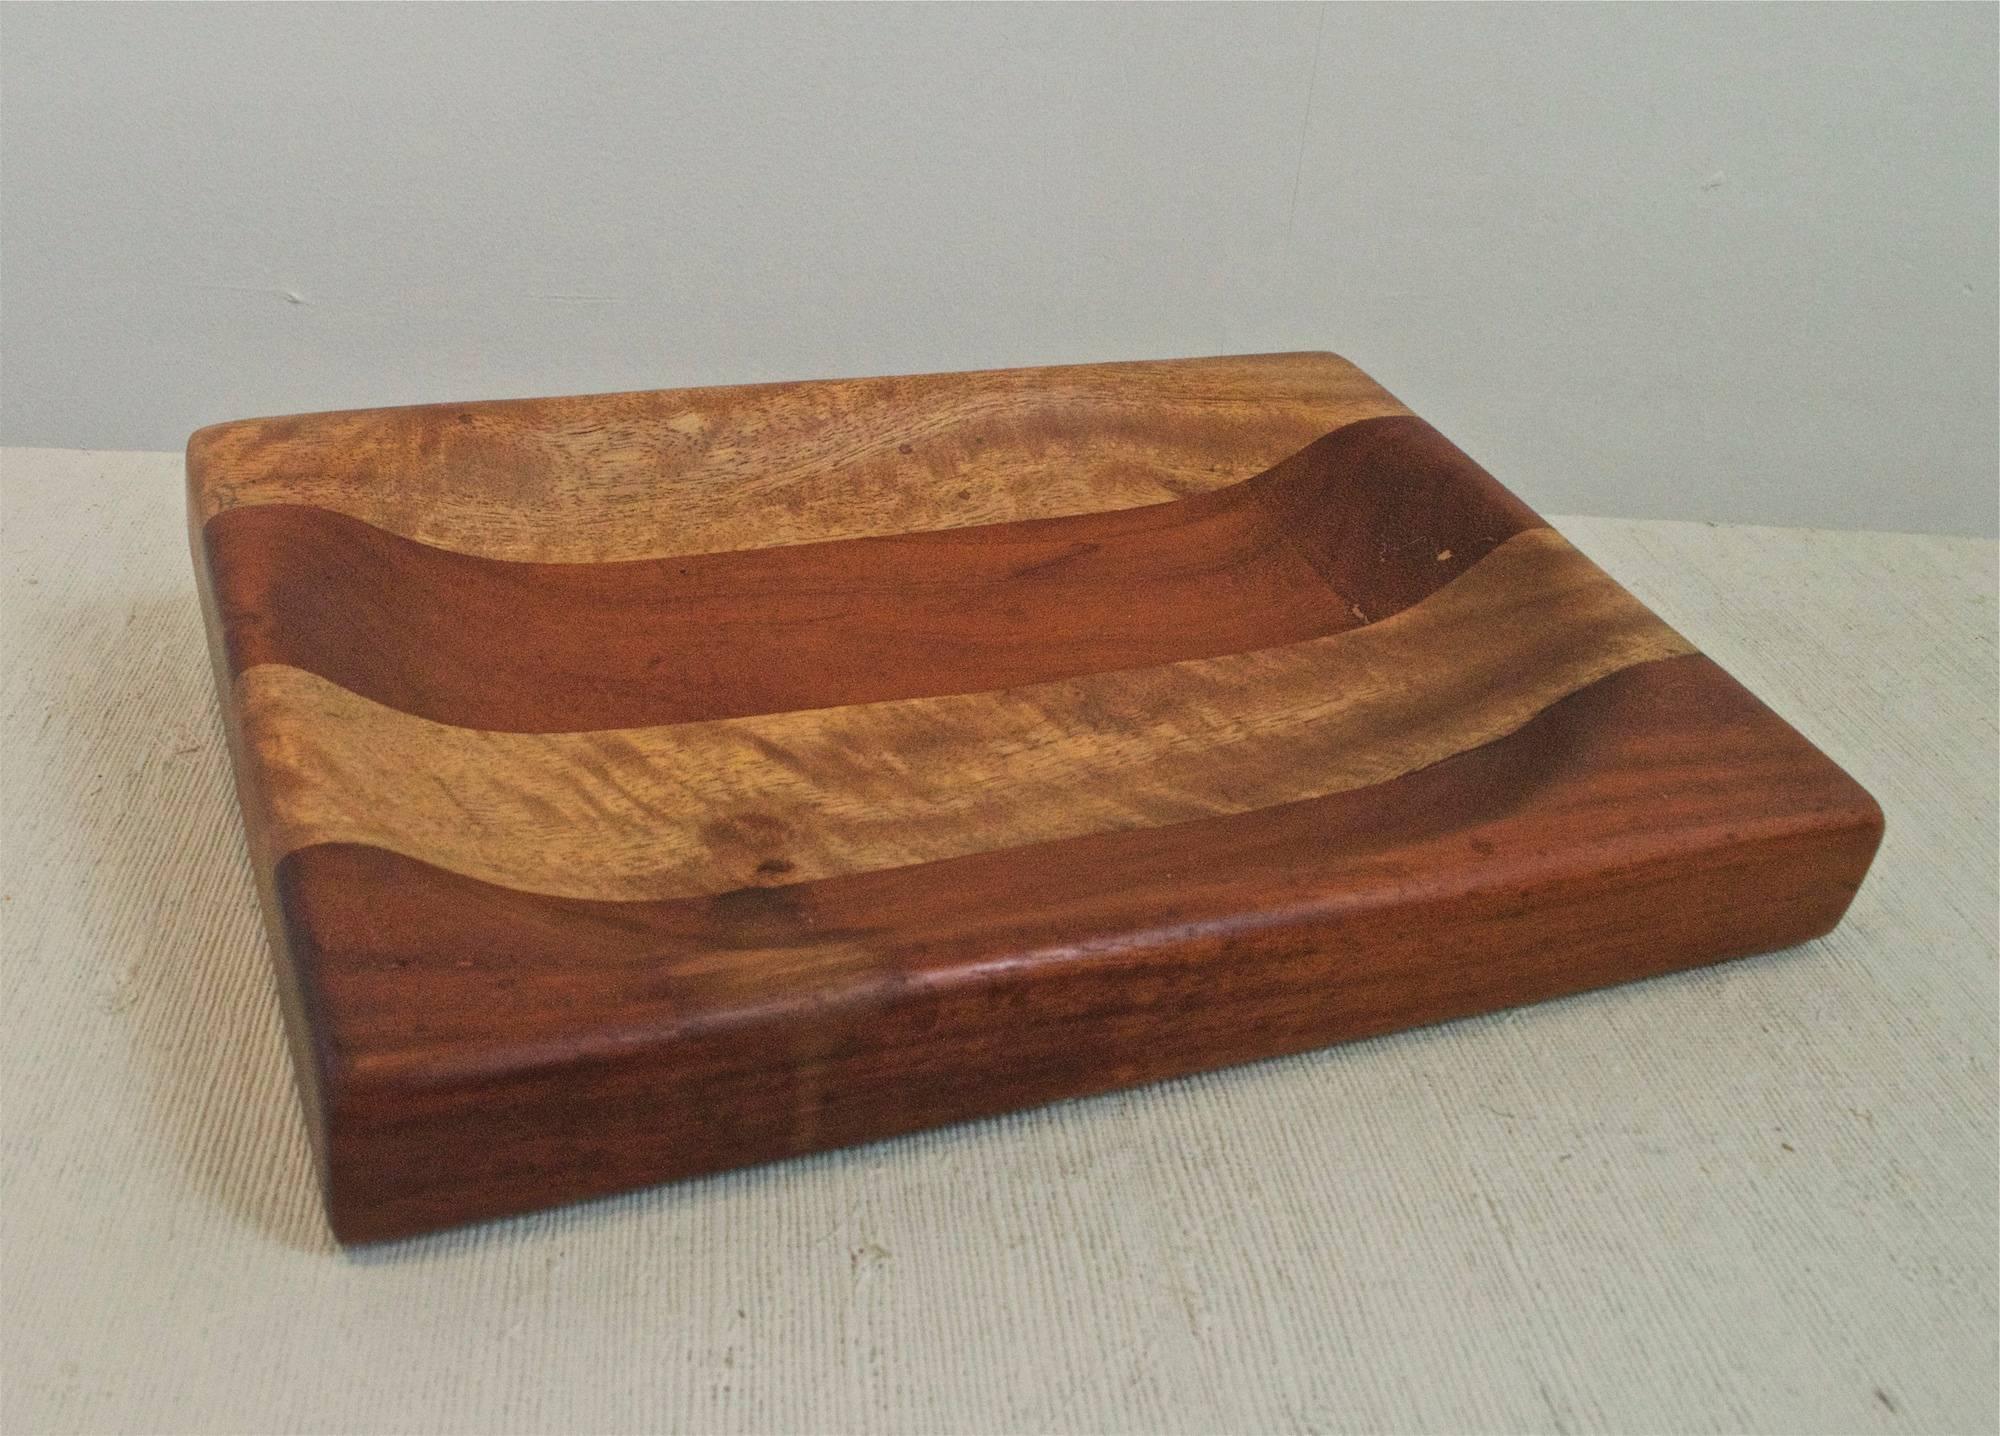 A shallow catchall bowl of teak and mango woods. The artisan made piece is skilfully joined and turned and is a work of very high craftsmanship.